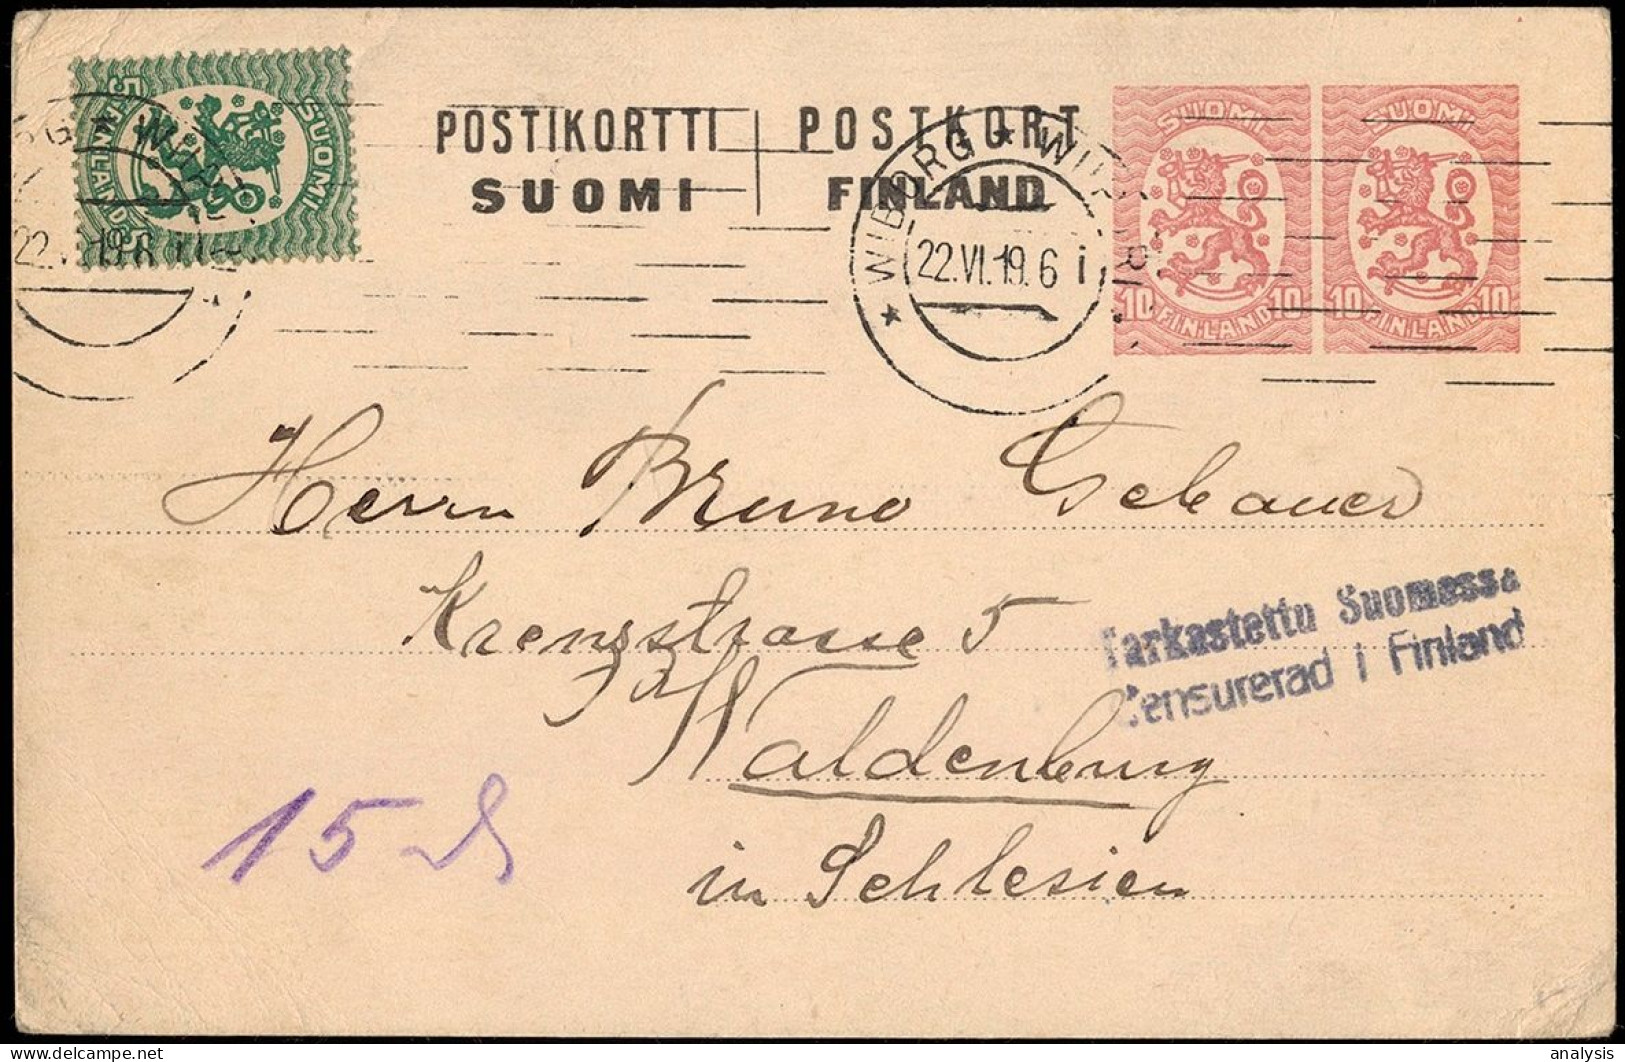 Finland Viipuri Uprated 2x10P Postal Stationery Card Mailed To Germany 1919 2-line Censor - Lettres & Documents